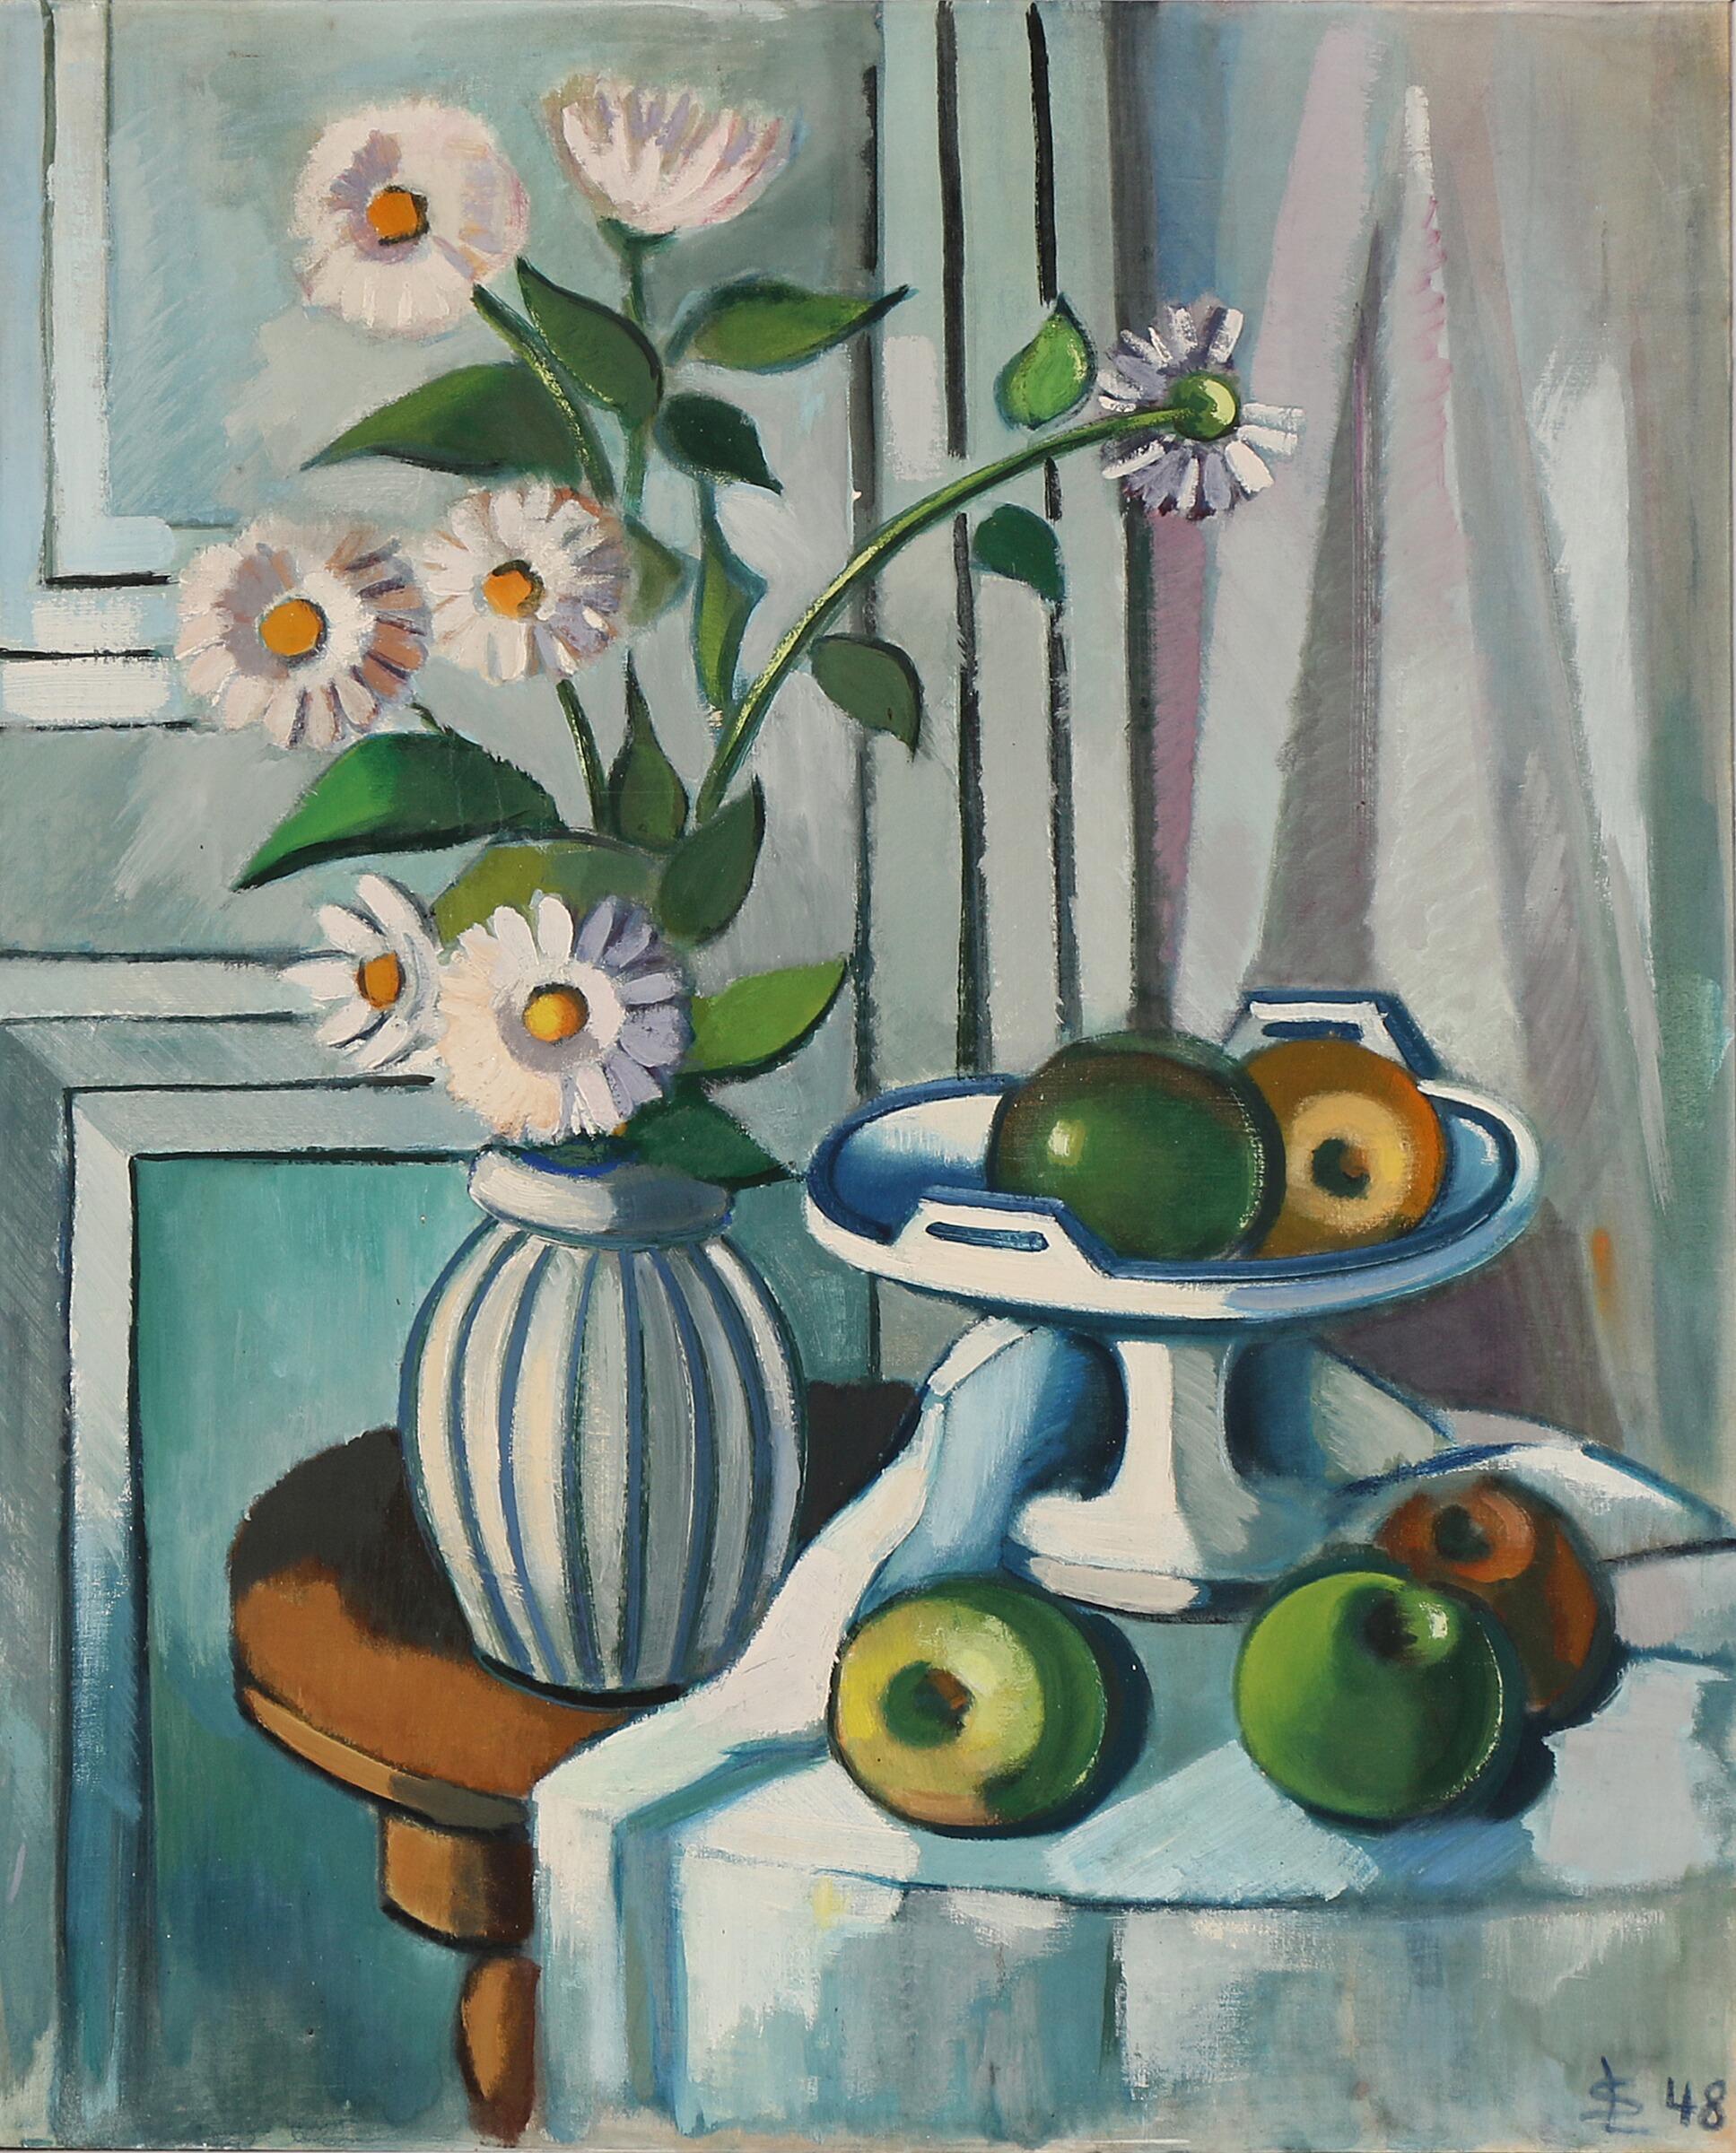 Svend Aage Lindstrøm, Danish artist 1902-1991. Still life with flowers and fruits. Signed with monogram 48. Oil on canvas laid on board. Painted on the reverse. Measures: 75×62 cm.